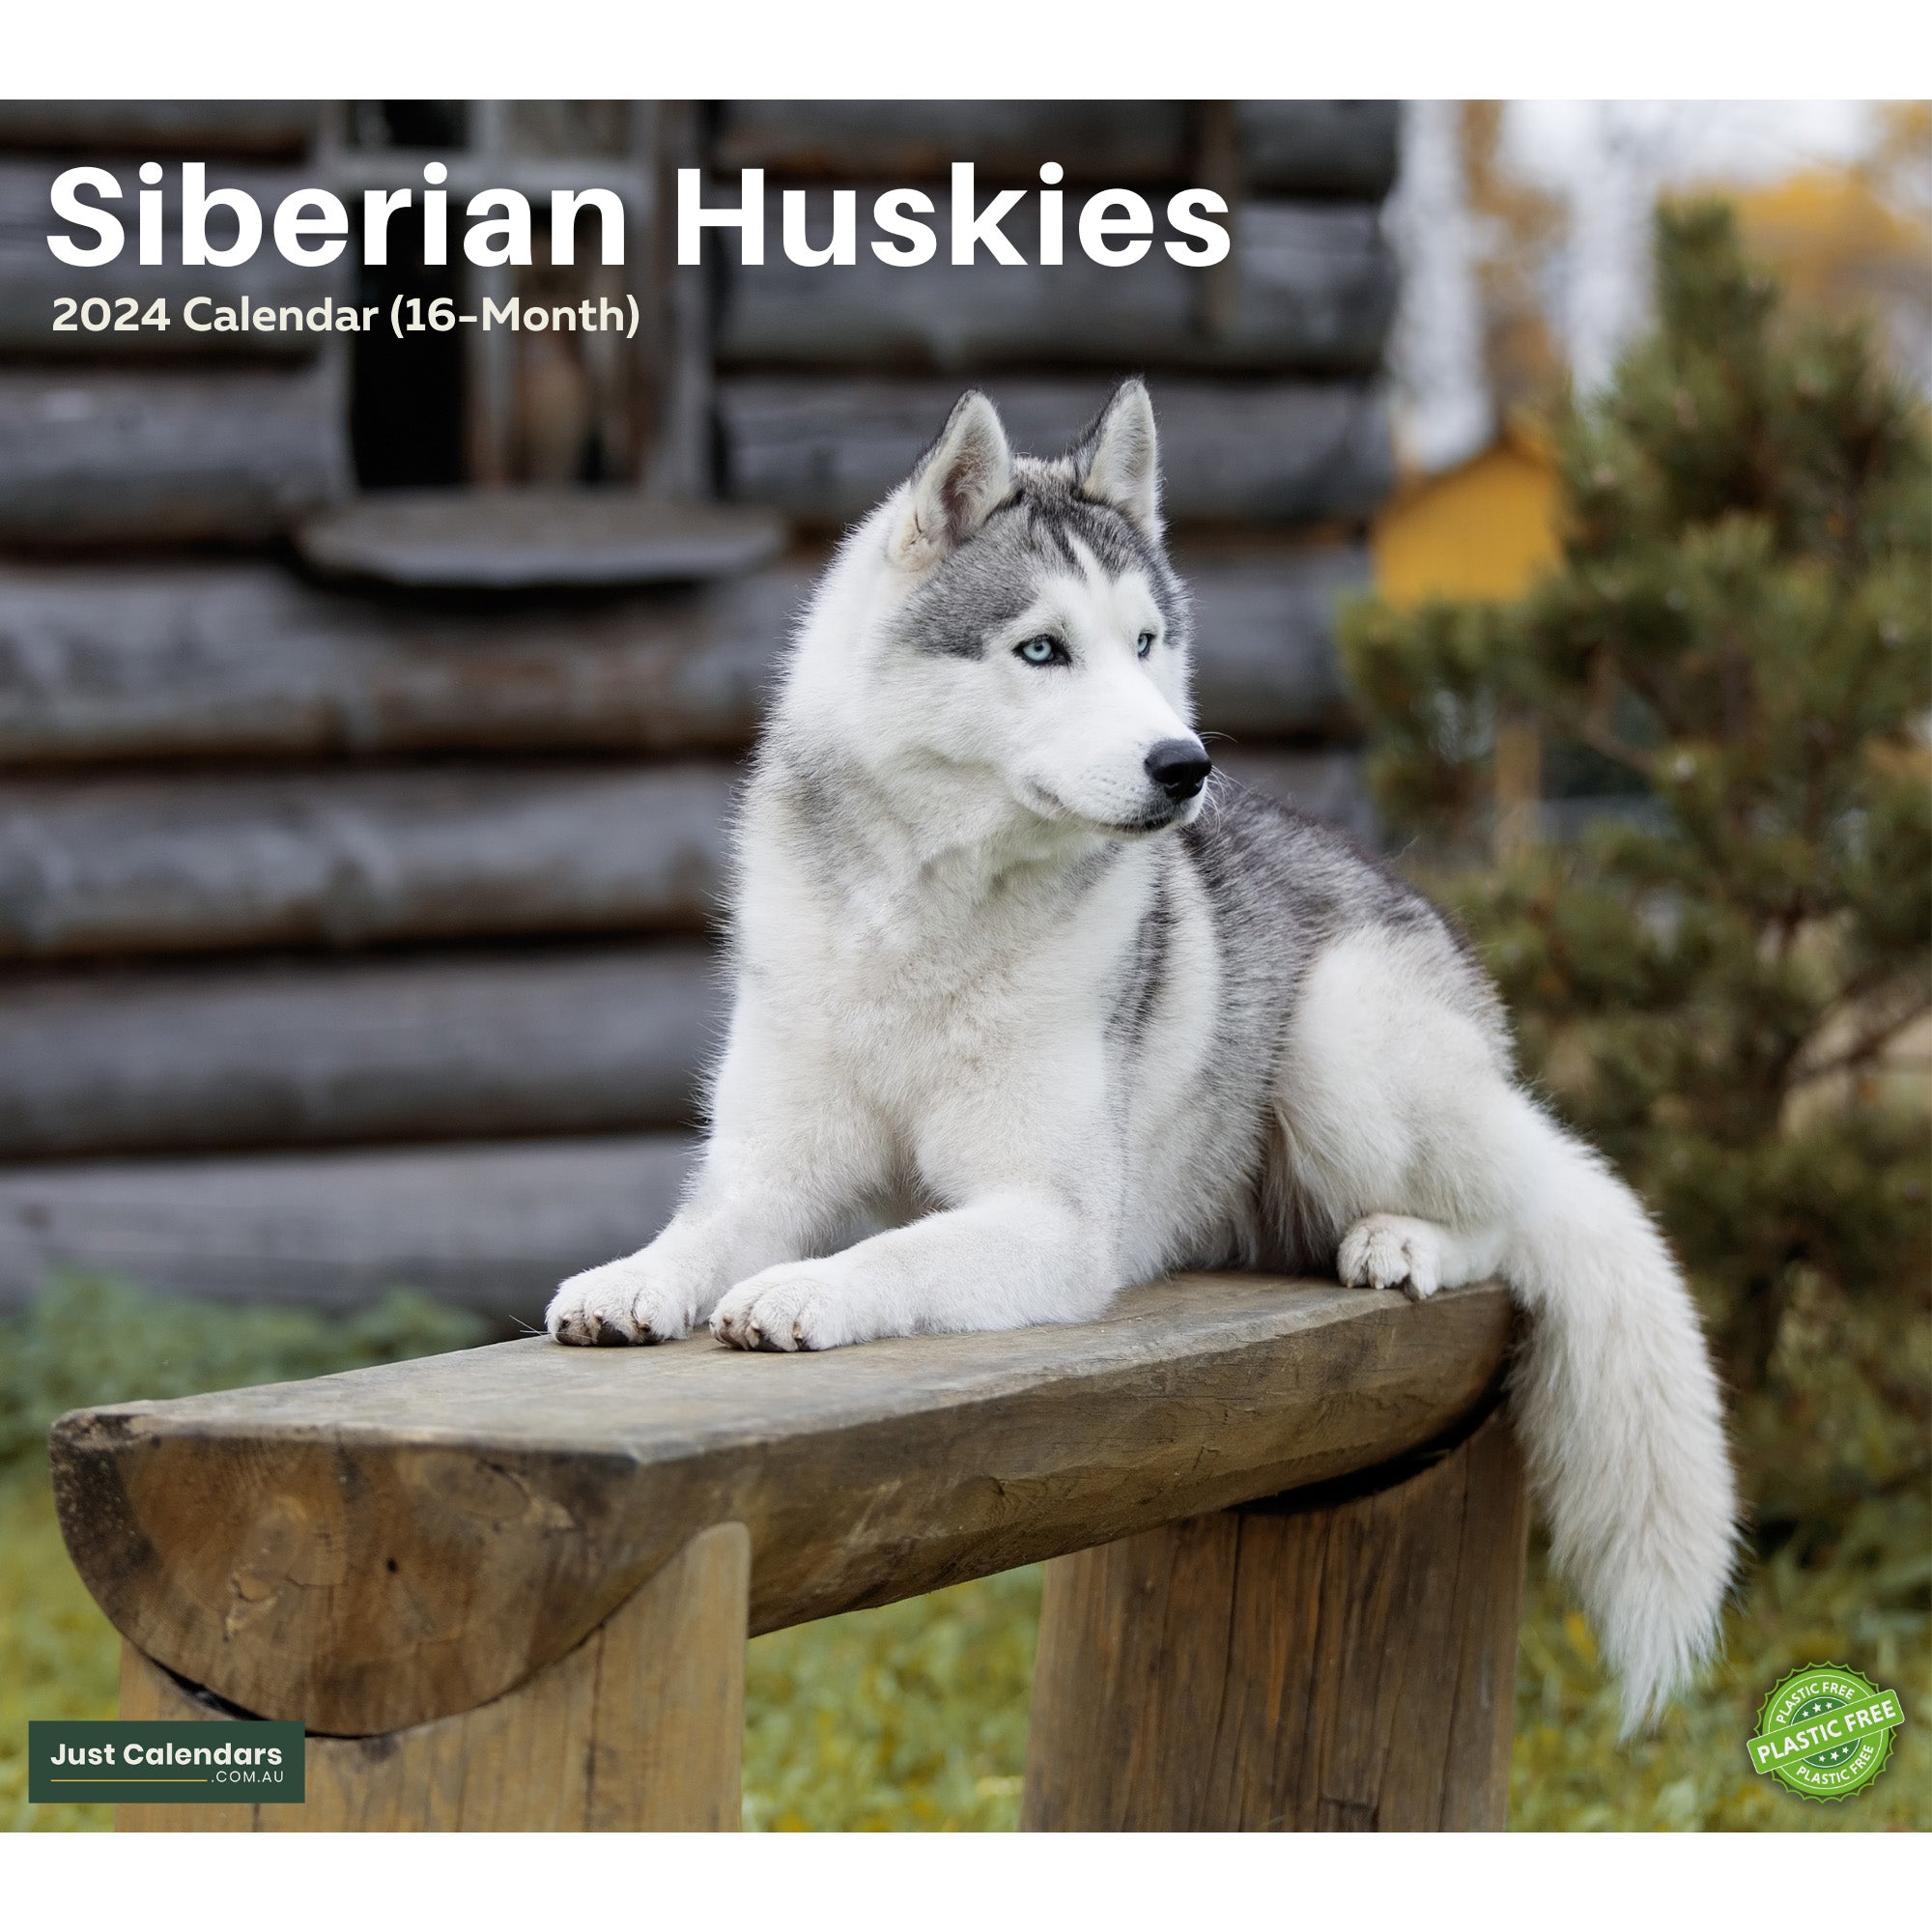 2024 Siberian Huskies Dogs & Puppies - Deluxe Wall Calendar by Just Calendars - 16 Month - Plastic Free